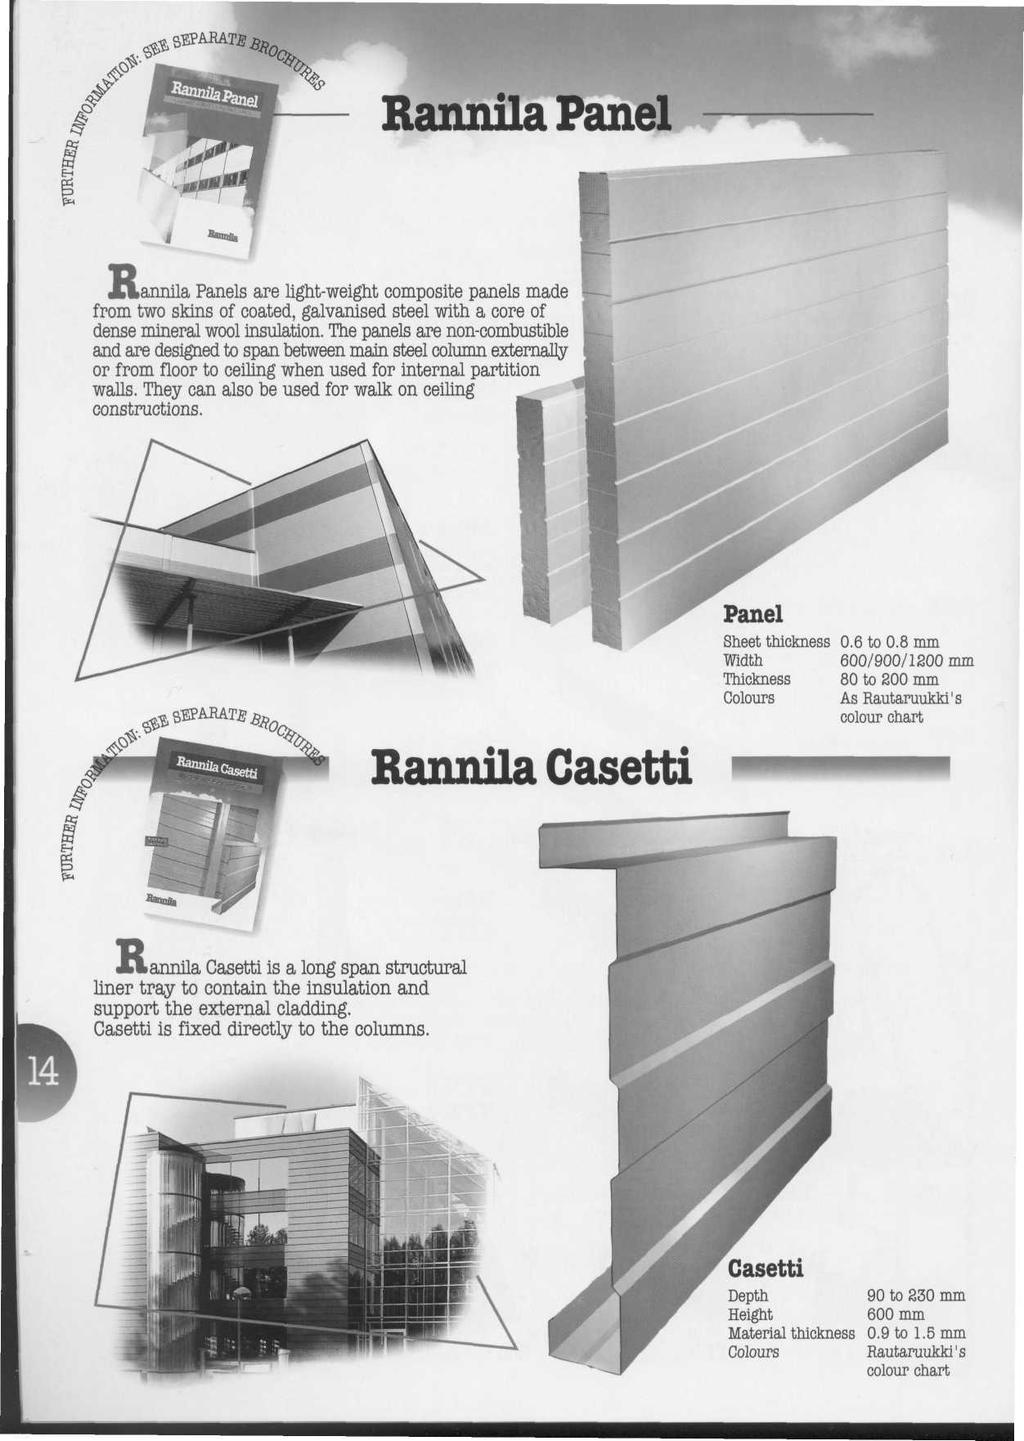 Rannila Panel Lannila Panels are light-weight composite panels made from two skins of coated, galvanised steel with a core of dense mineral wool insulation.